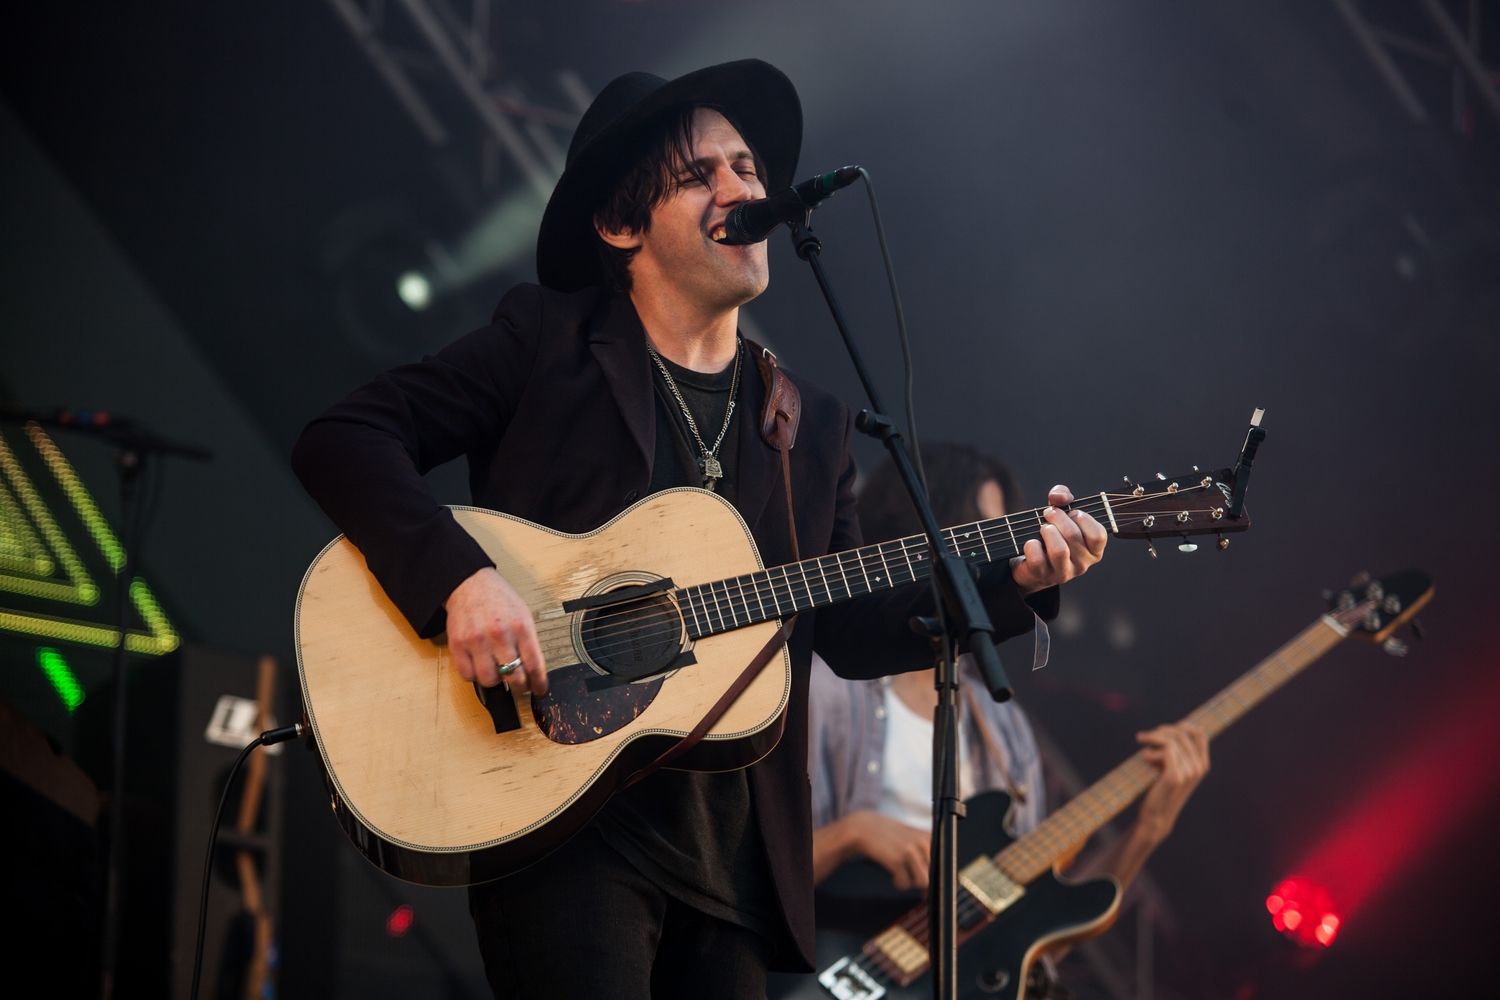 Conor Oberst announces a string of UK tour dates